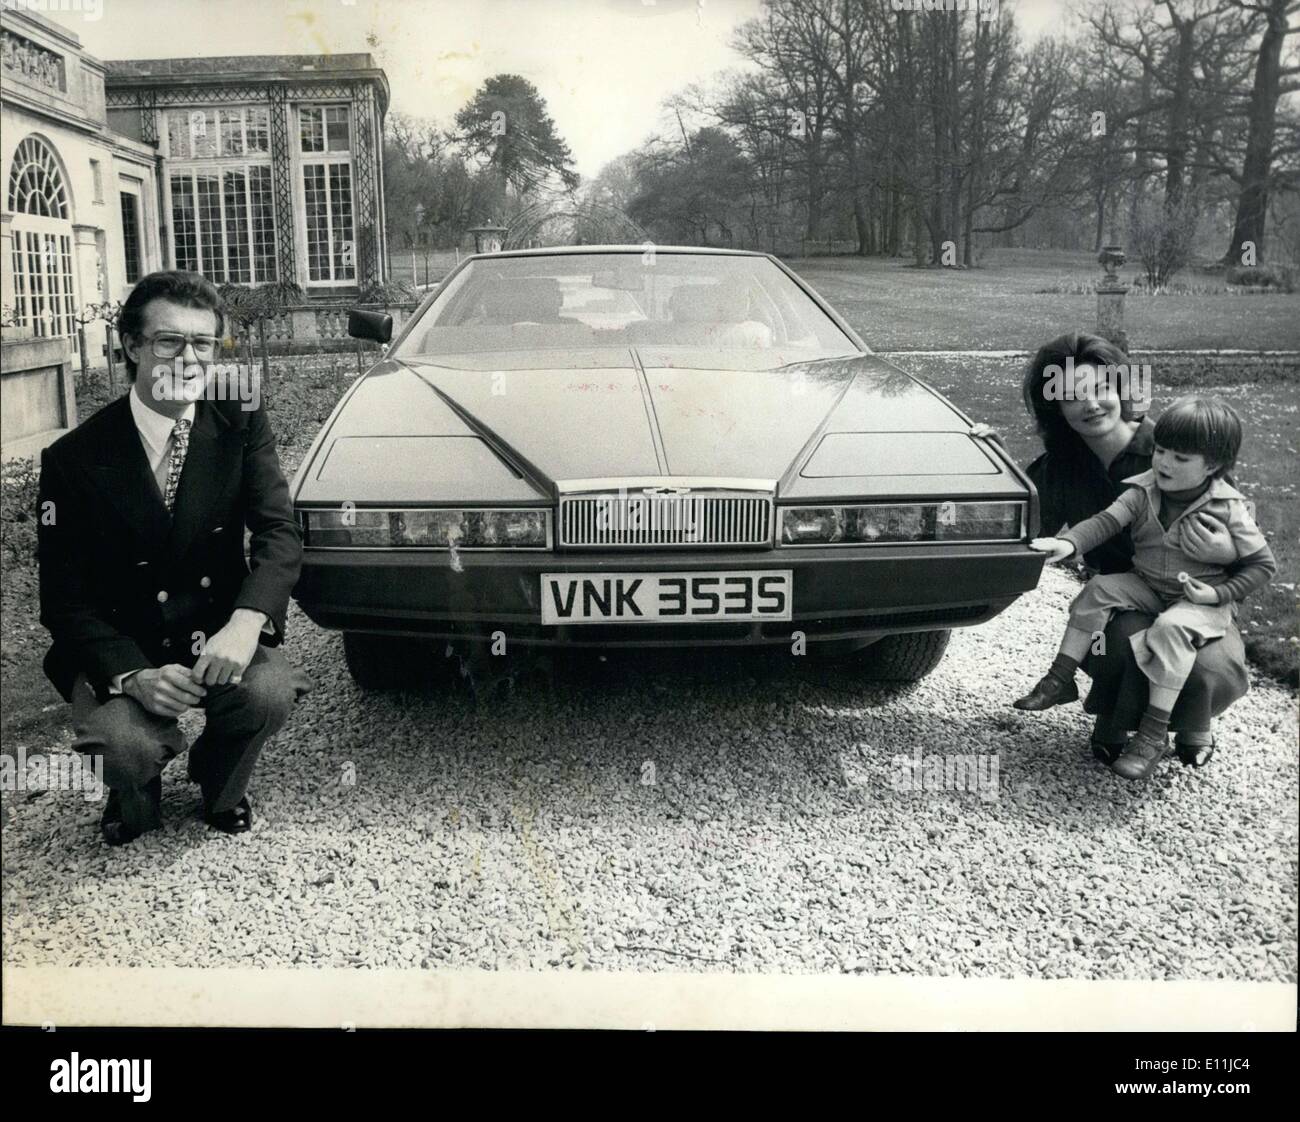 Apr. 24, 1978 - Lord Tavistock receives a ?32,000 Lagonda as wedding Anniversary present from his wife: Lord Tavistock today received from his wife ?32,000 Aston Marin Lagonda, Lord and Lady Tavistock celebrate thieir 17the wedding anniversary of June 20, Lady Tavistock exoplained ''I expected delivery of the car about then, so i decided to pay for the cat myself-with my diners club credit card-and give it to my husband as a present. The car has been delivered rather earlier than expected, but the sntiment is the same'' Stock Photo